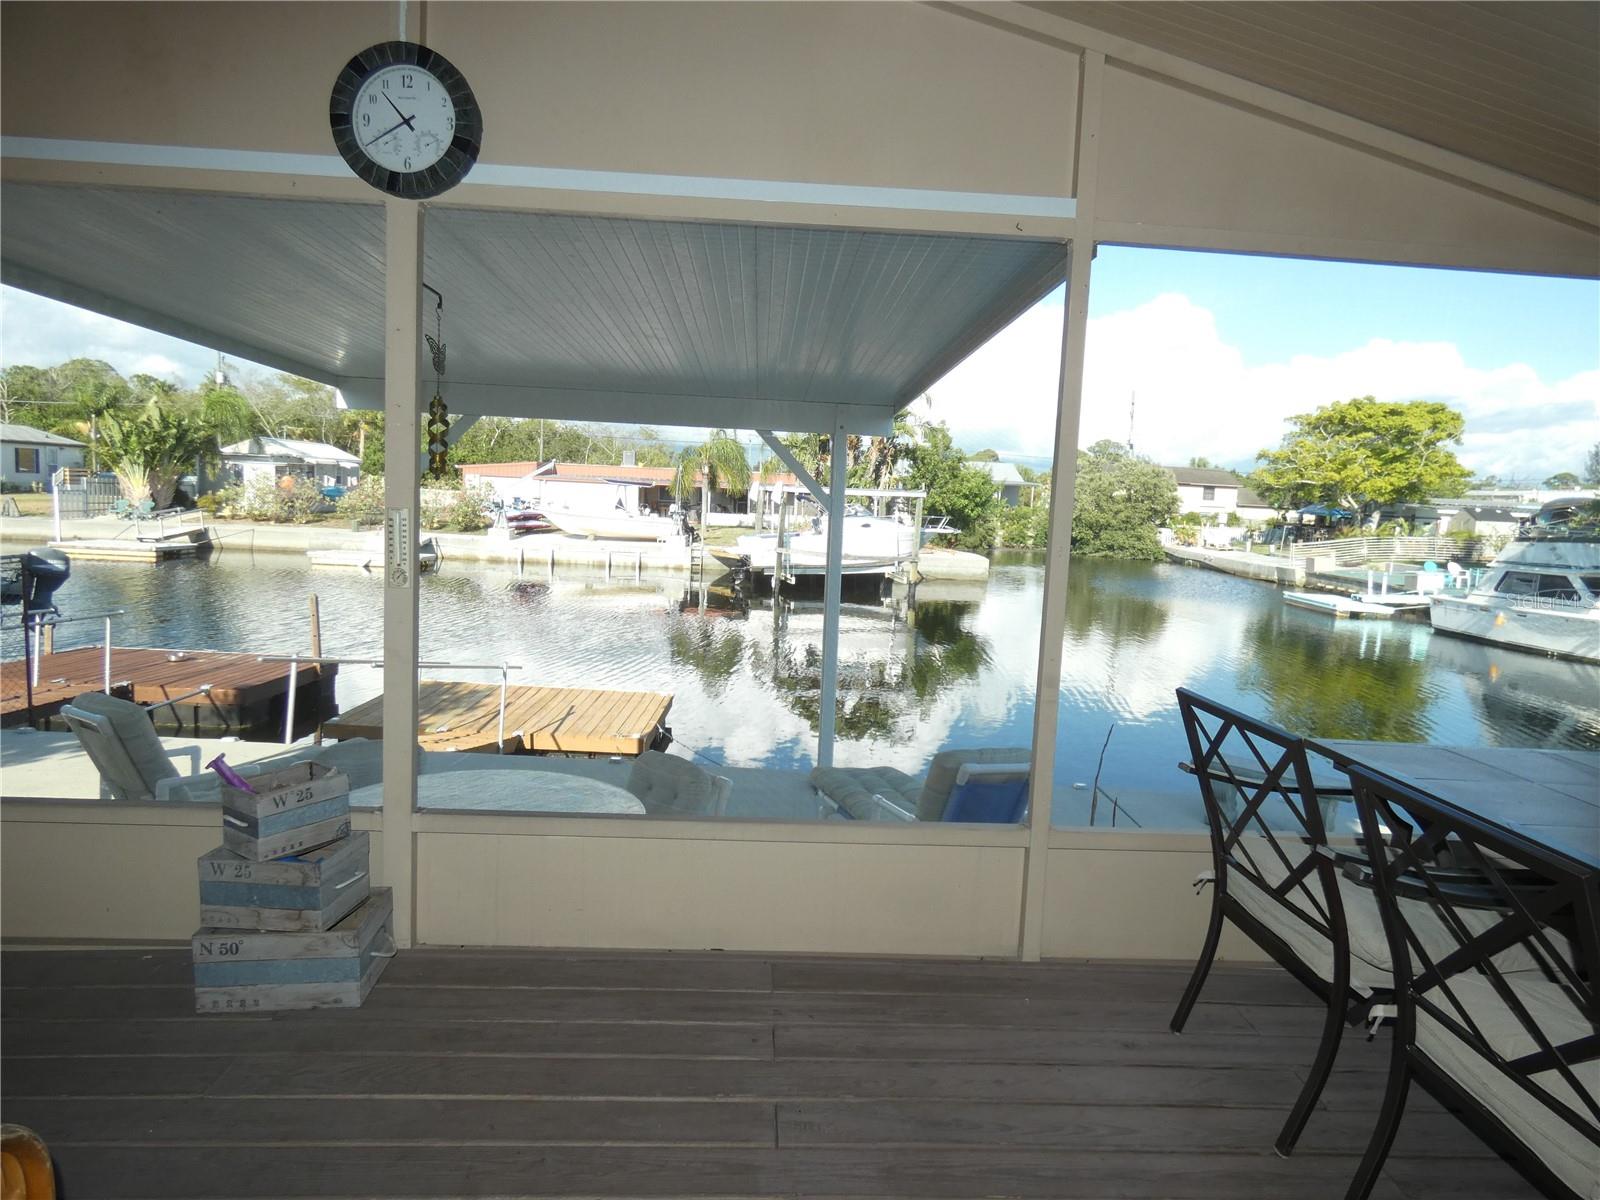 Waterfront view from the sliding door in living room.